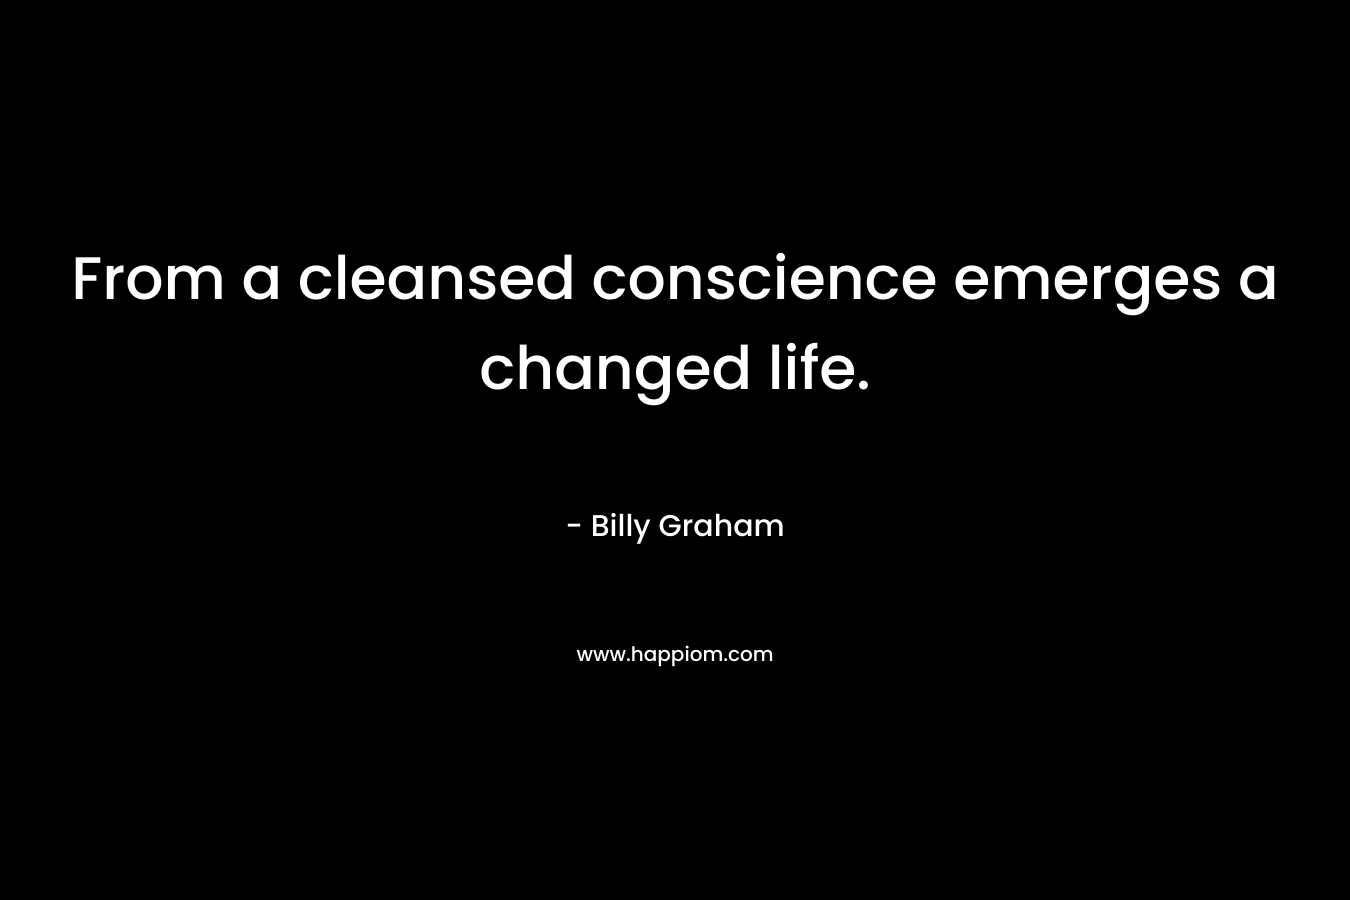 From a cleansed conscience emerges a changed life.